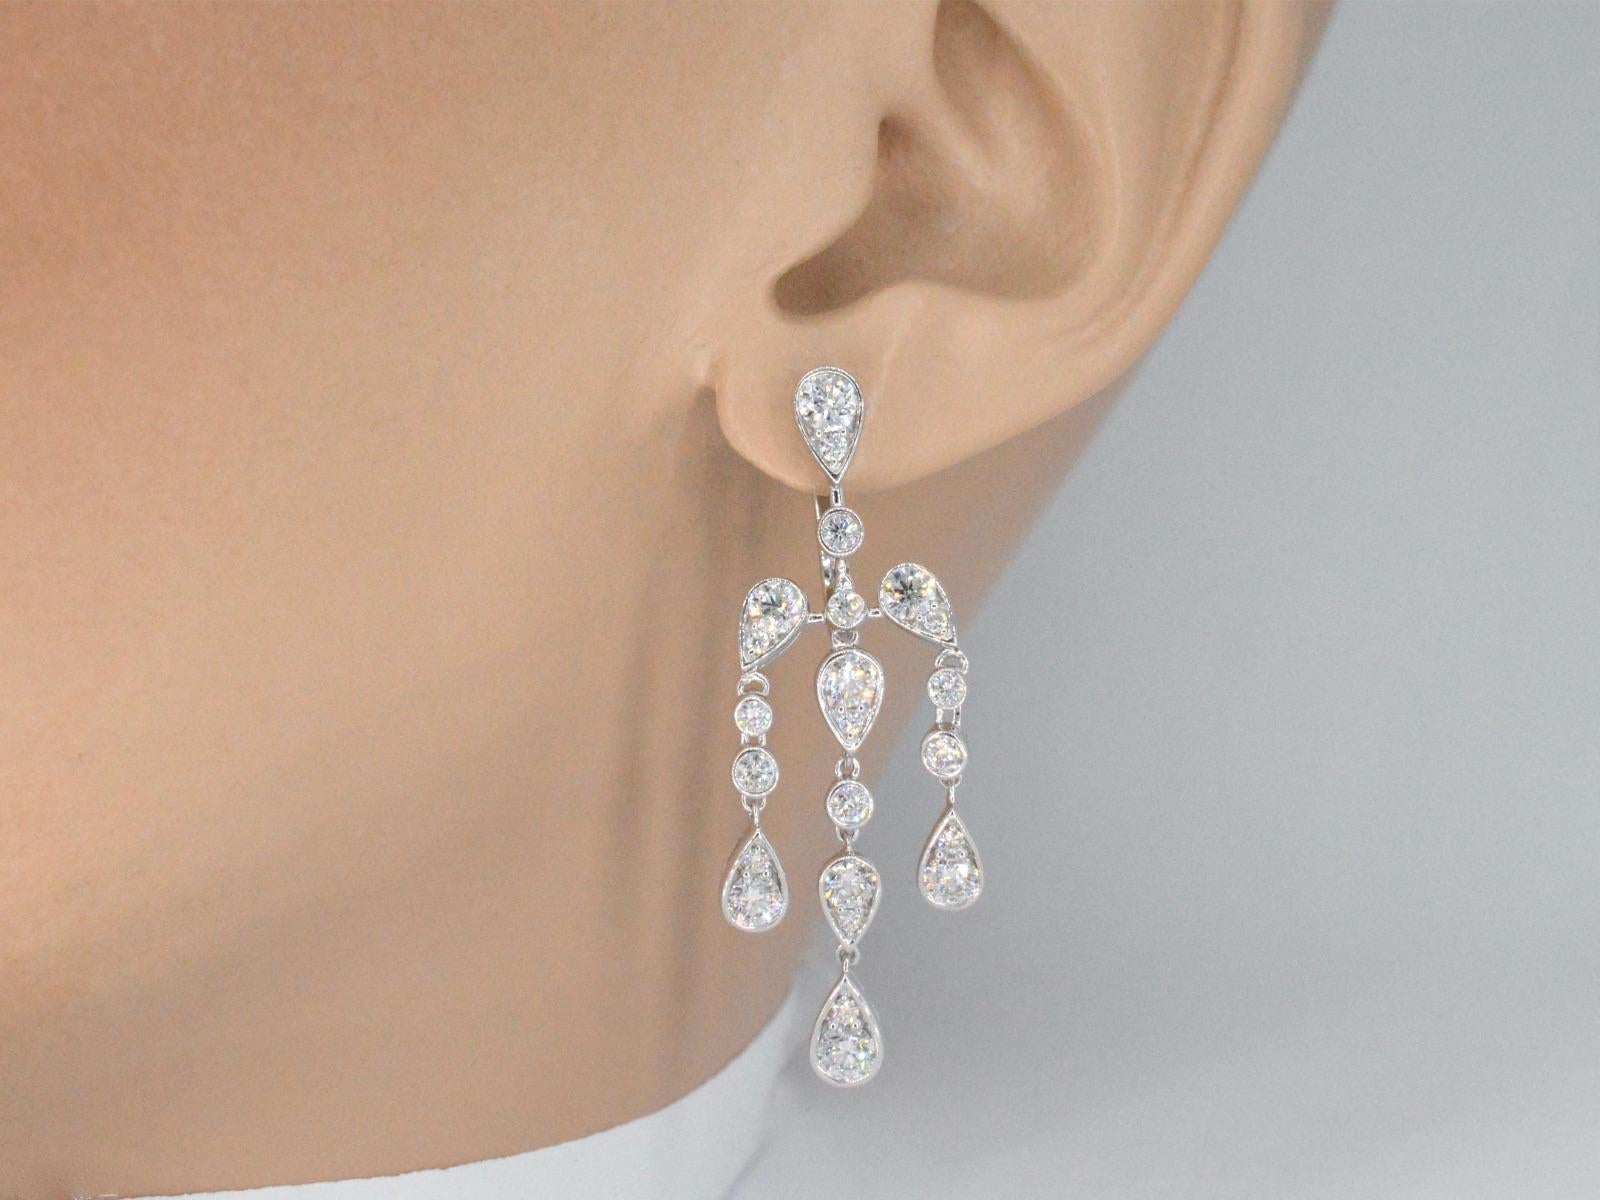 Contemporary White Gold Earrings in a Special Design with Diamonds For Sale